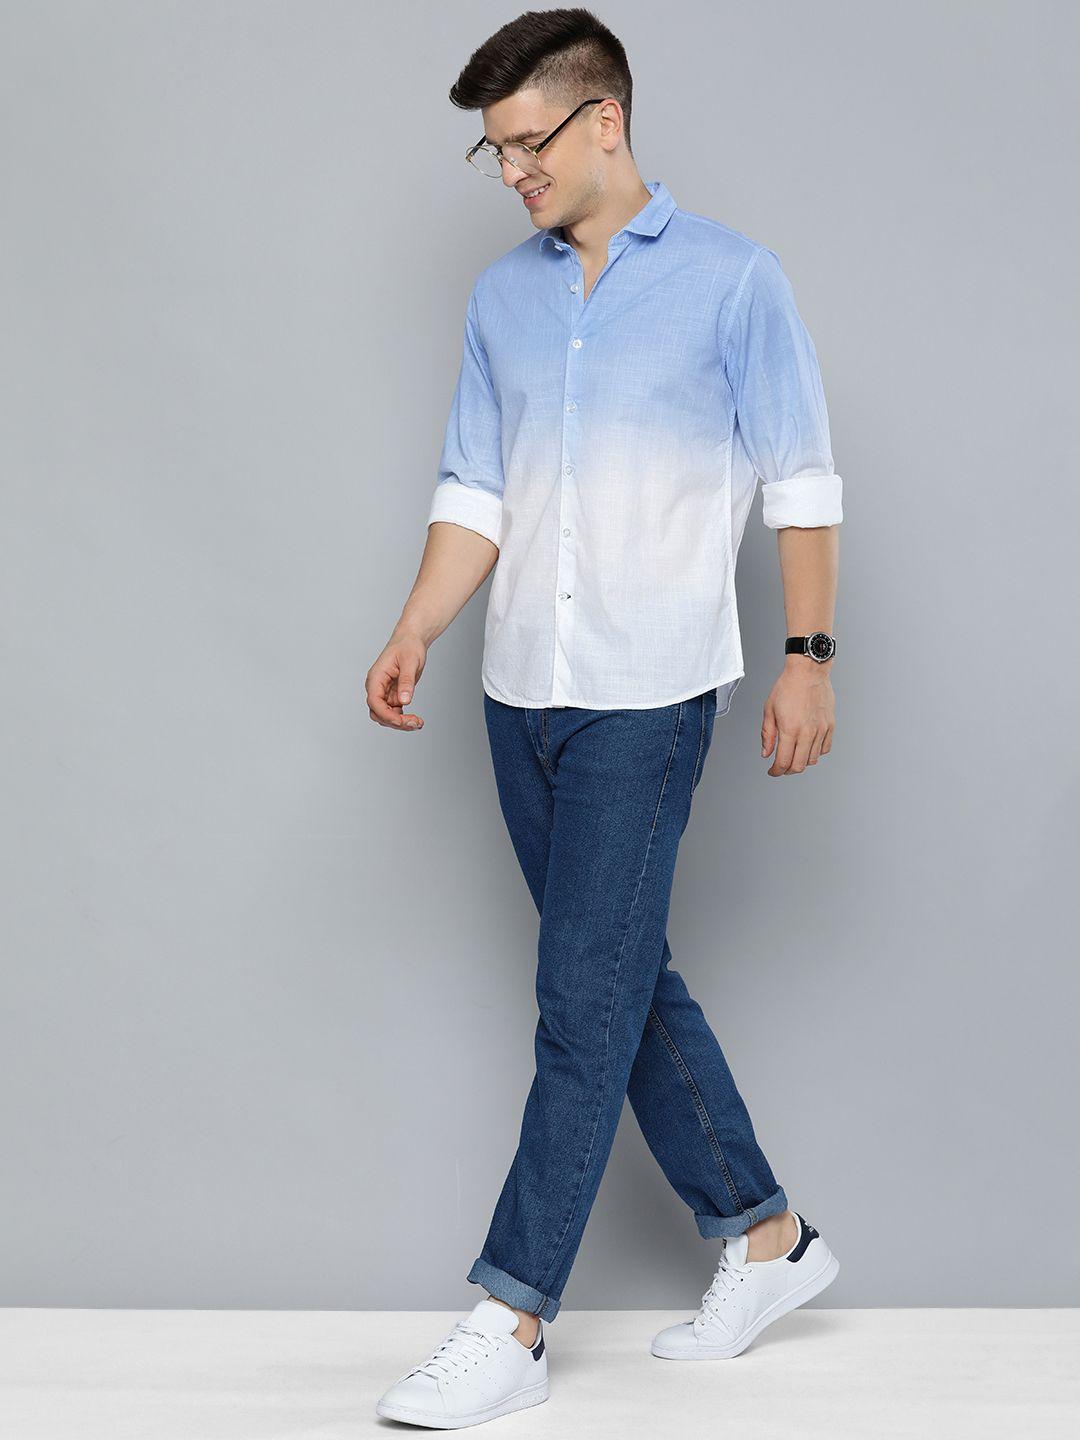 mast & harbour men blue & white ombre dyed casual pure cotton sustainable shirt